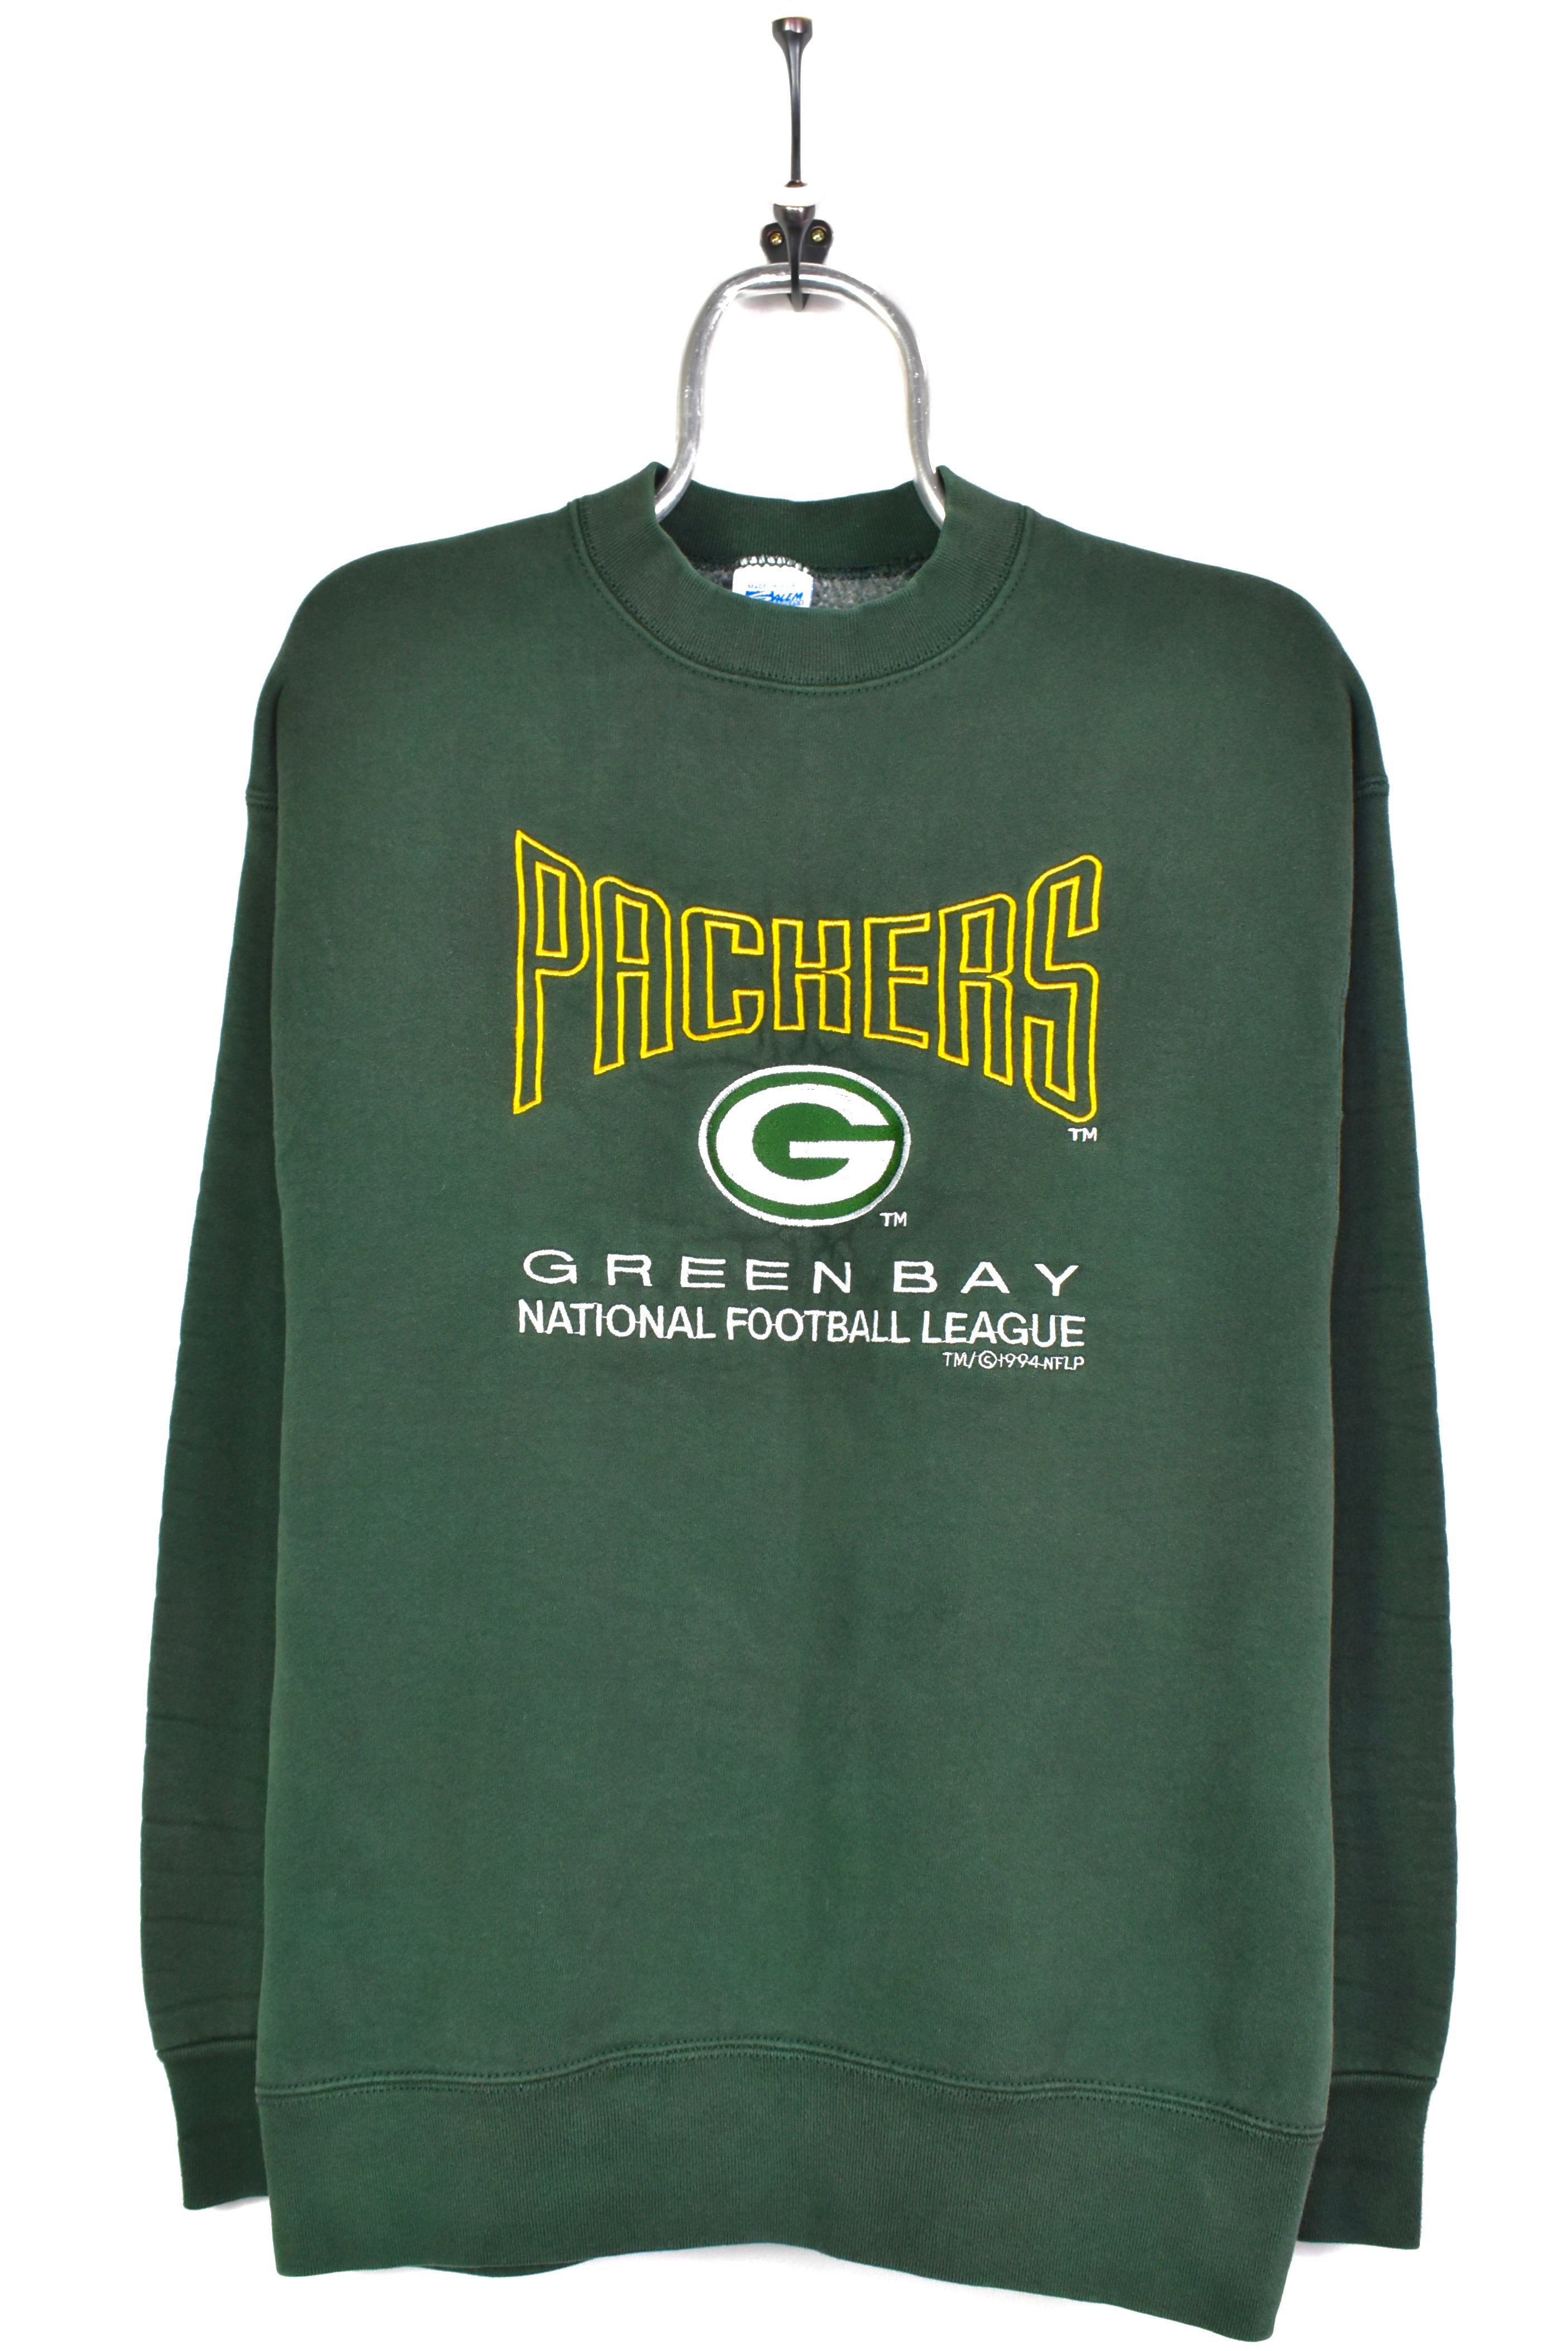 Vintage 1994 NFL Green Bay Packers embroidered green sweatshirt | M/L PRO SPORT